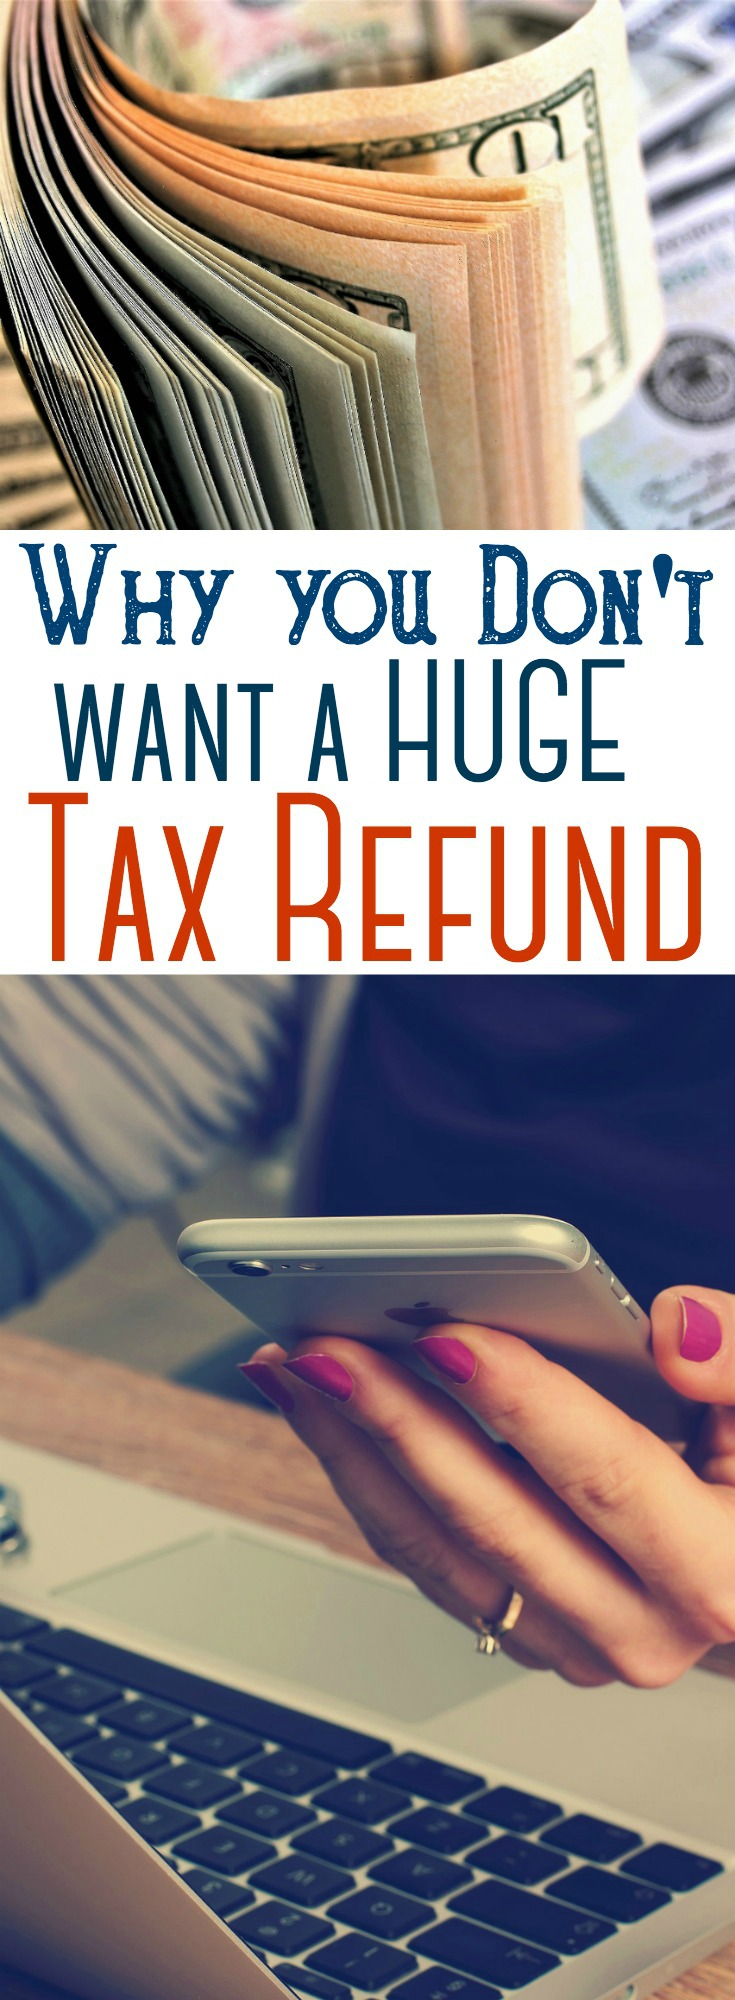 Why you Don't Want a Huge Tax Refund | The CentsAble Shoppin